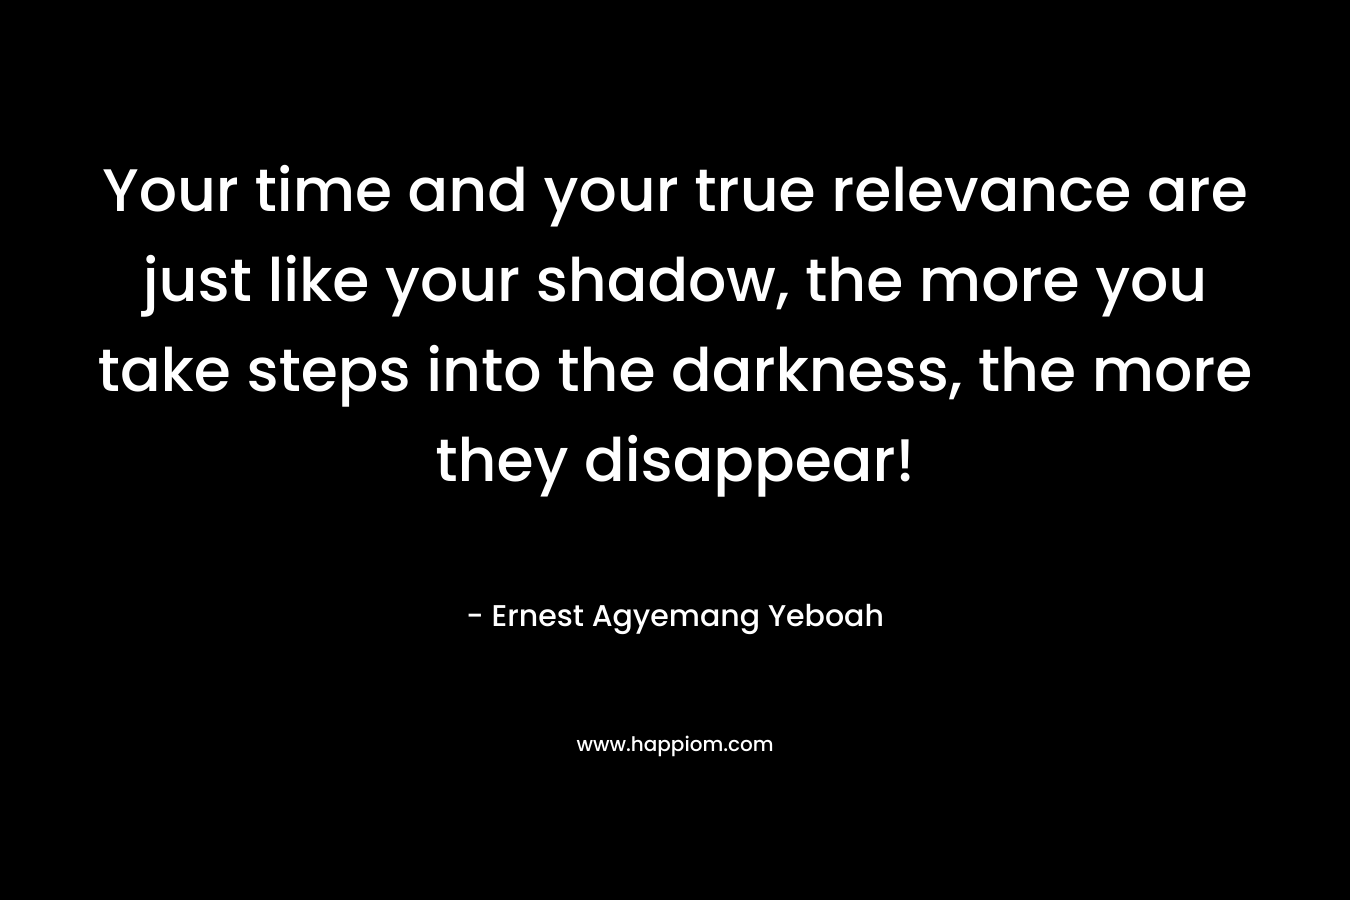 Your time and your true relevance are just like your shadow, the more you take steps into the darkness, the more they disappear! – Ernest Agyemang Yeboah